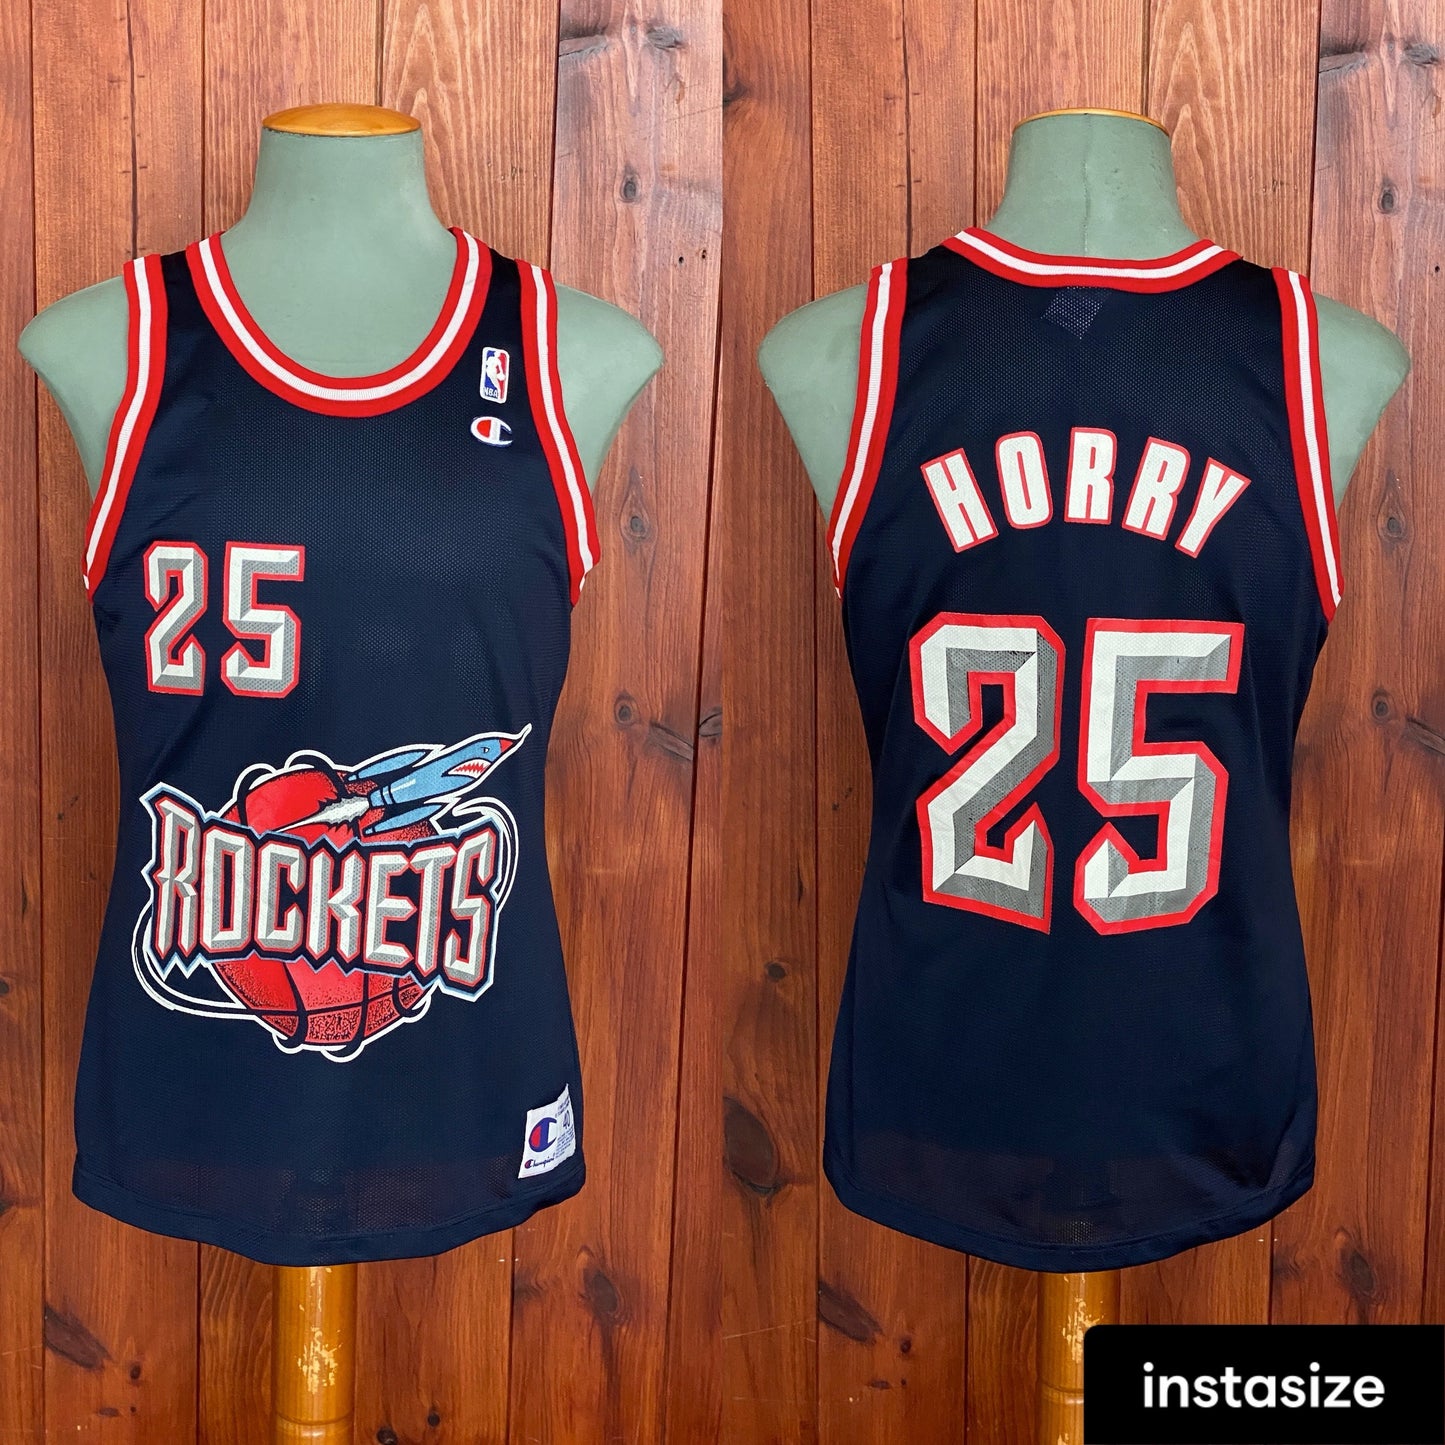 90s vintage Champion NBA Houston Rockets jersey, #25 Horry, size 40 - Classic basketball fan and collector's item.